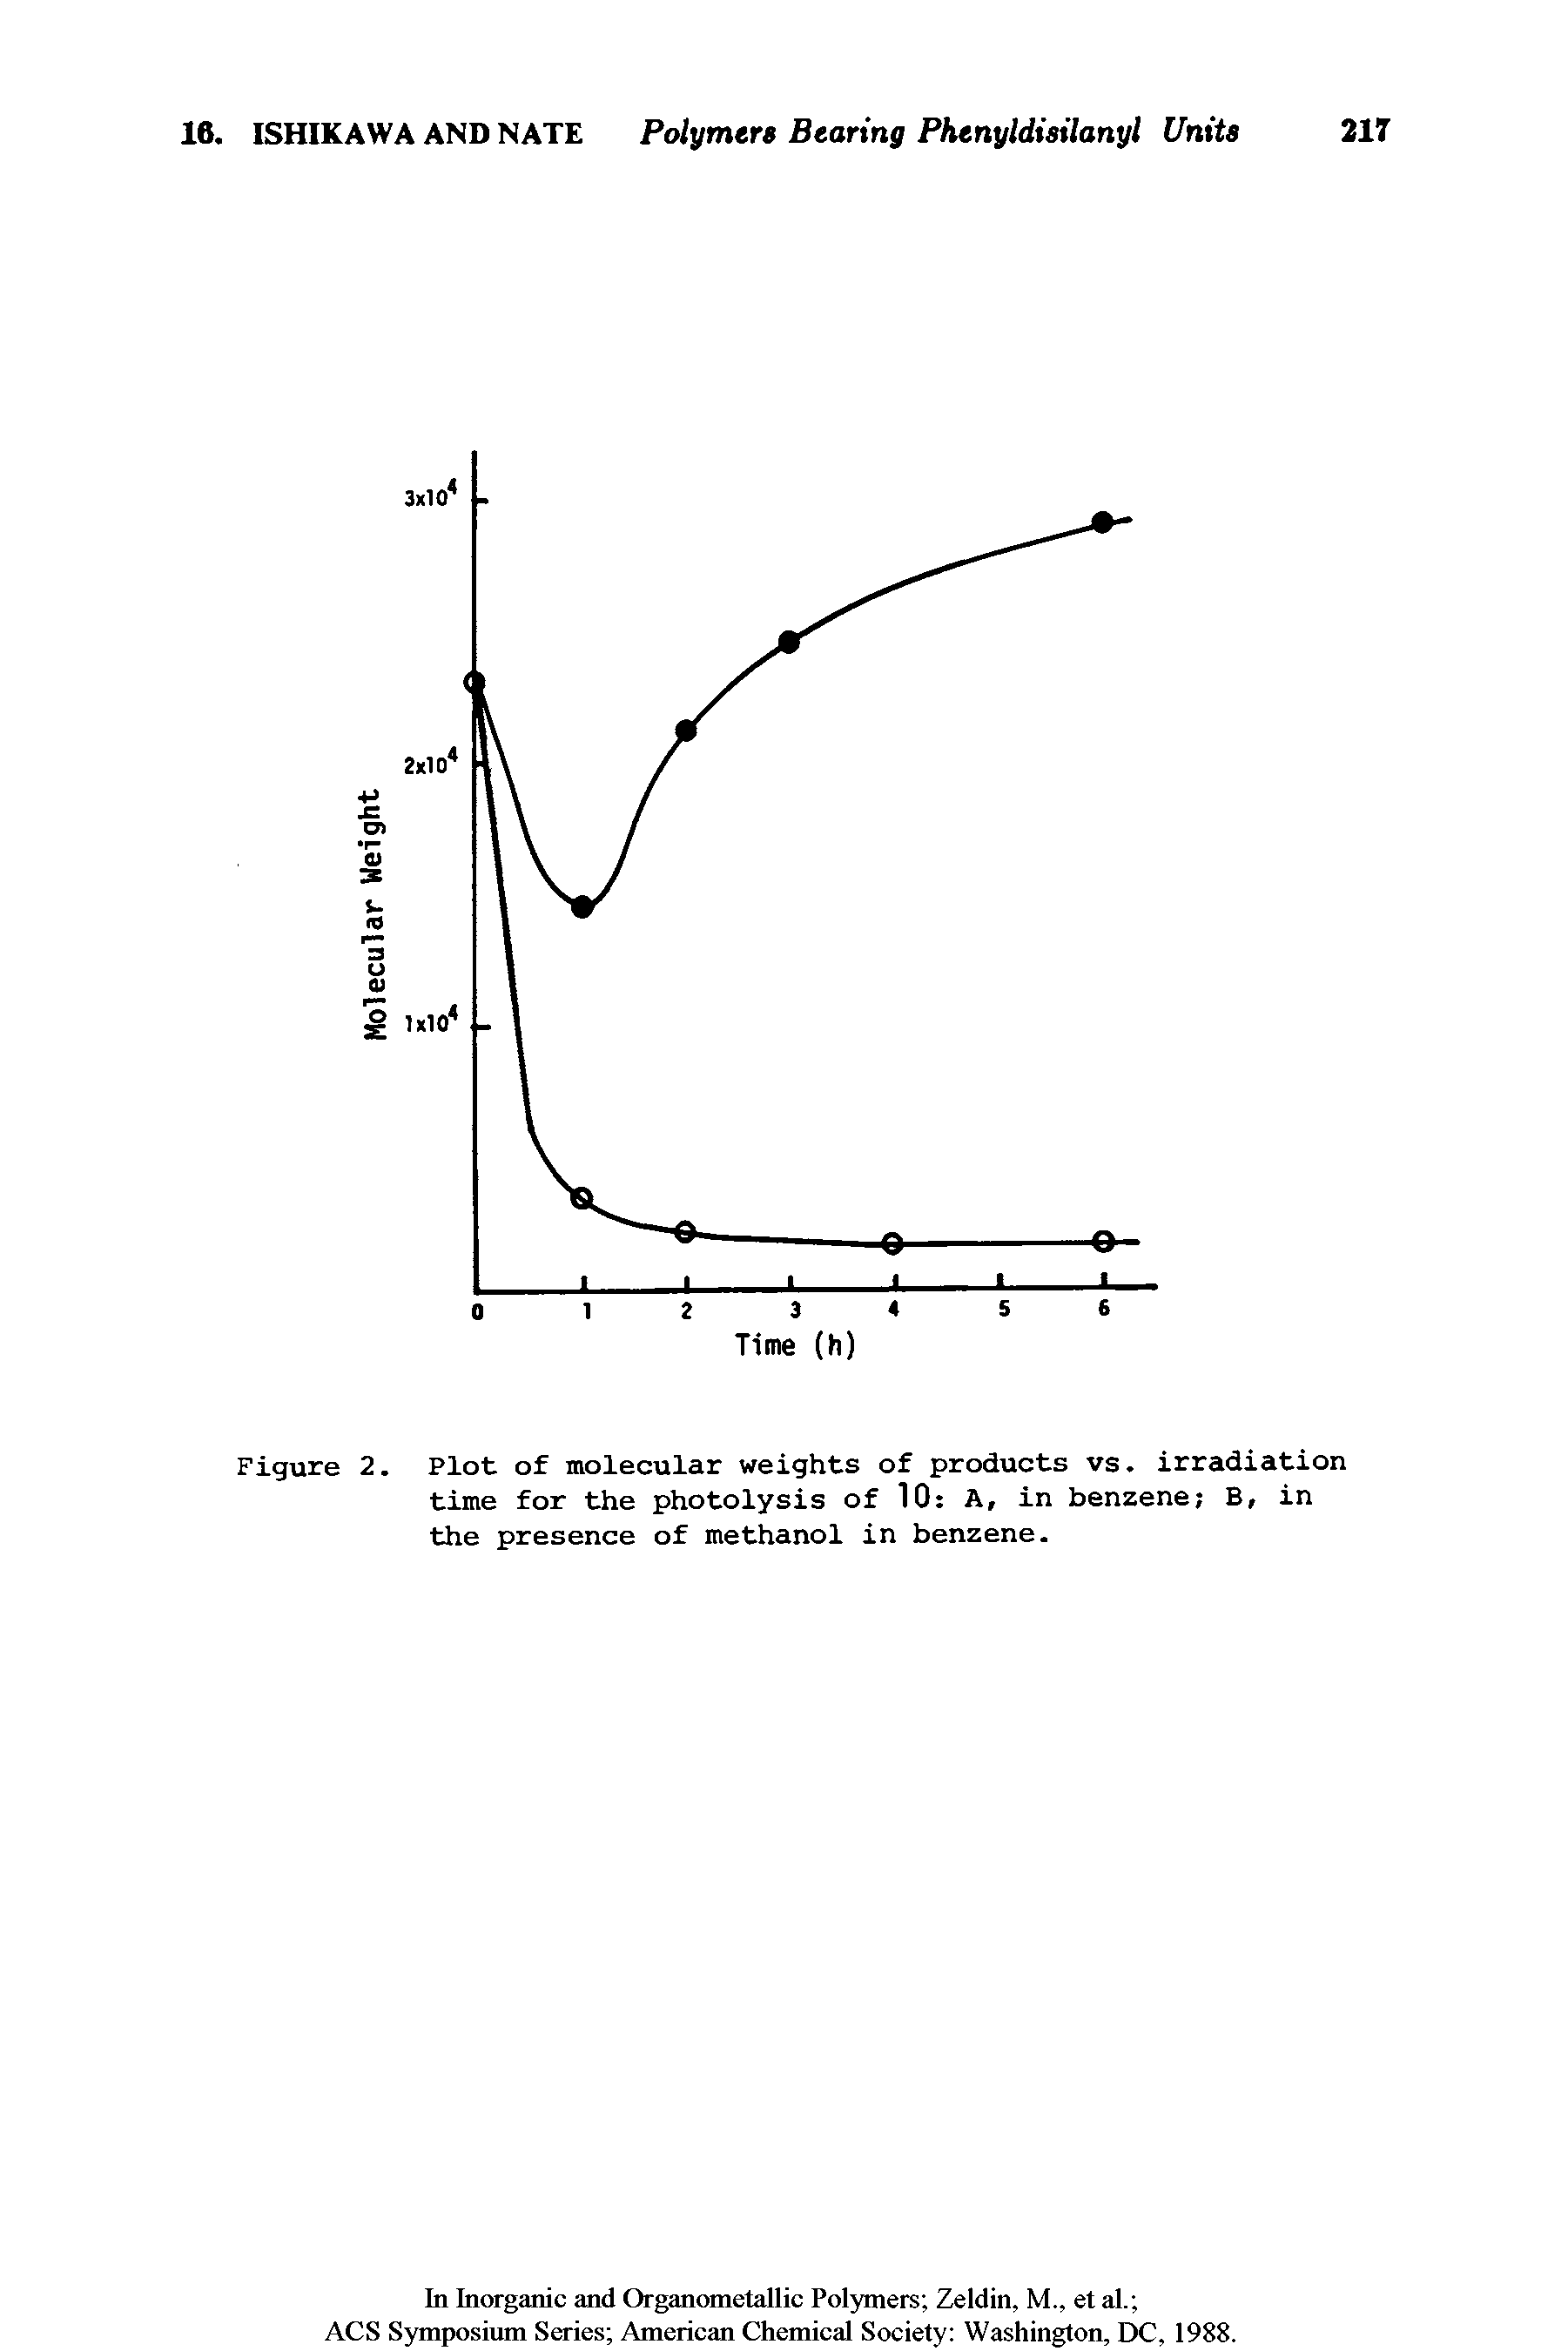 Figure 2. Plot of molecular weights of products vs. irradiation time for the photolysis of 10 A, in benzene B, in the presence of methanol in benzene.